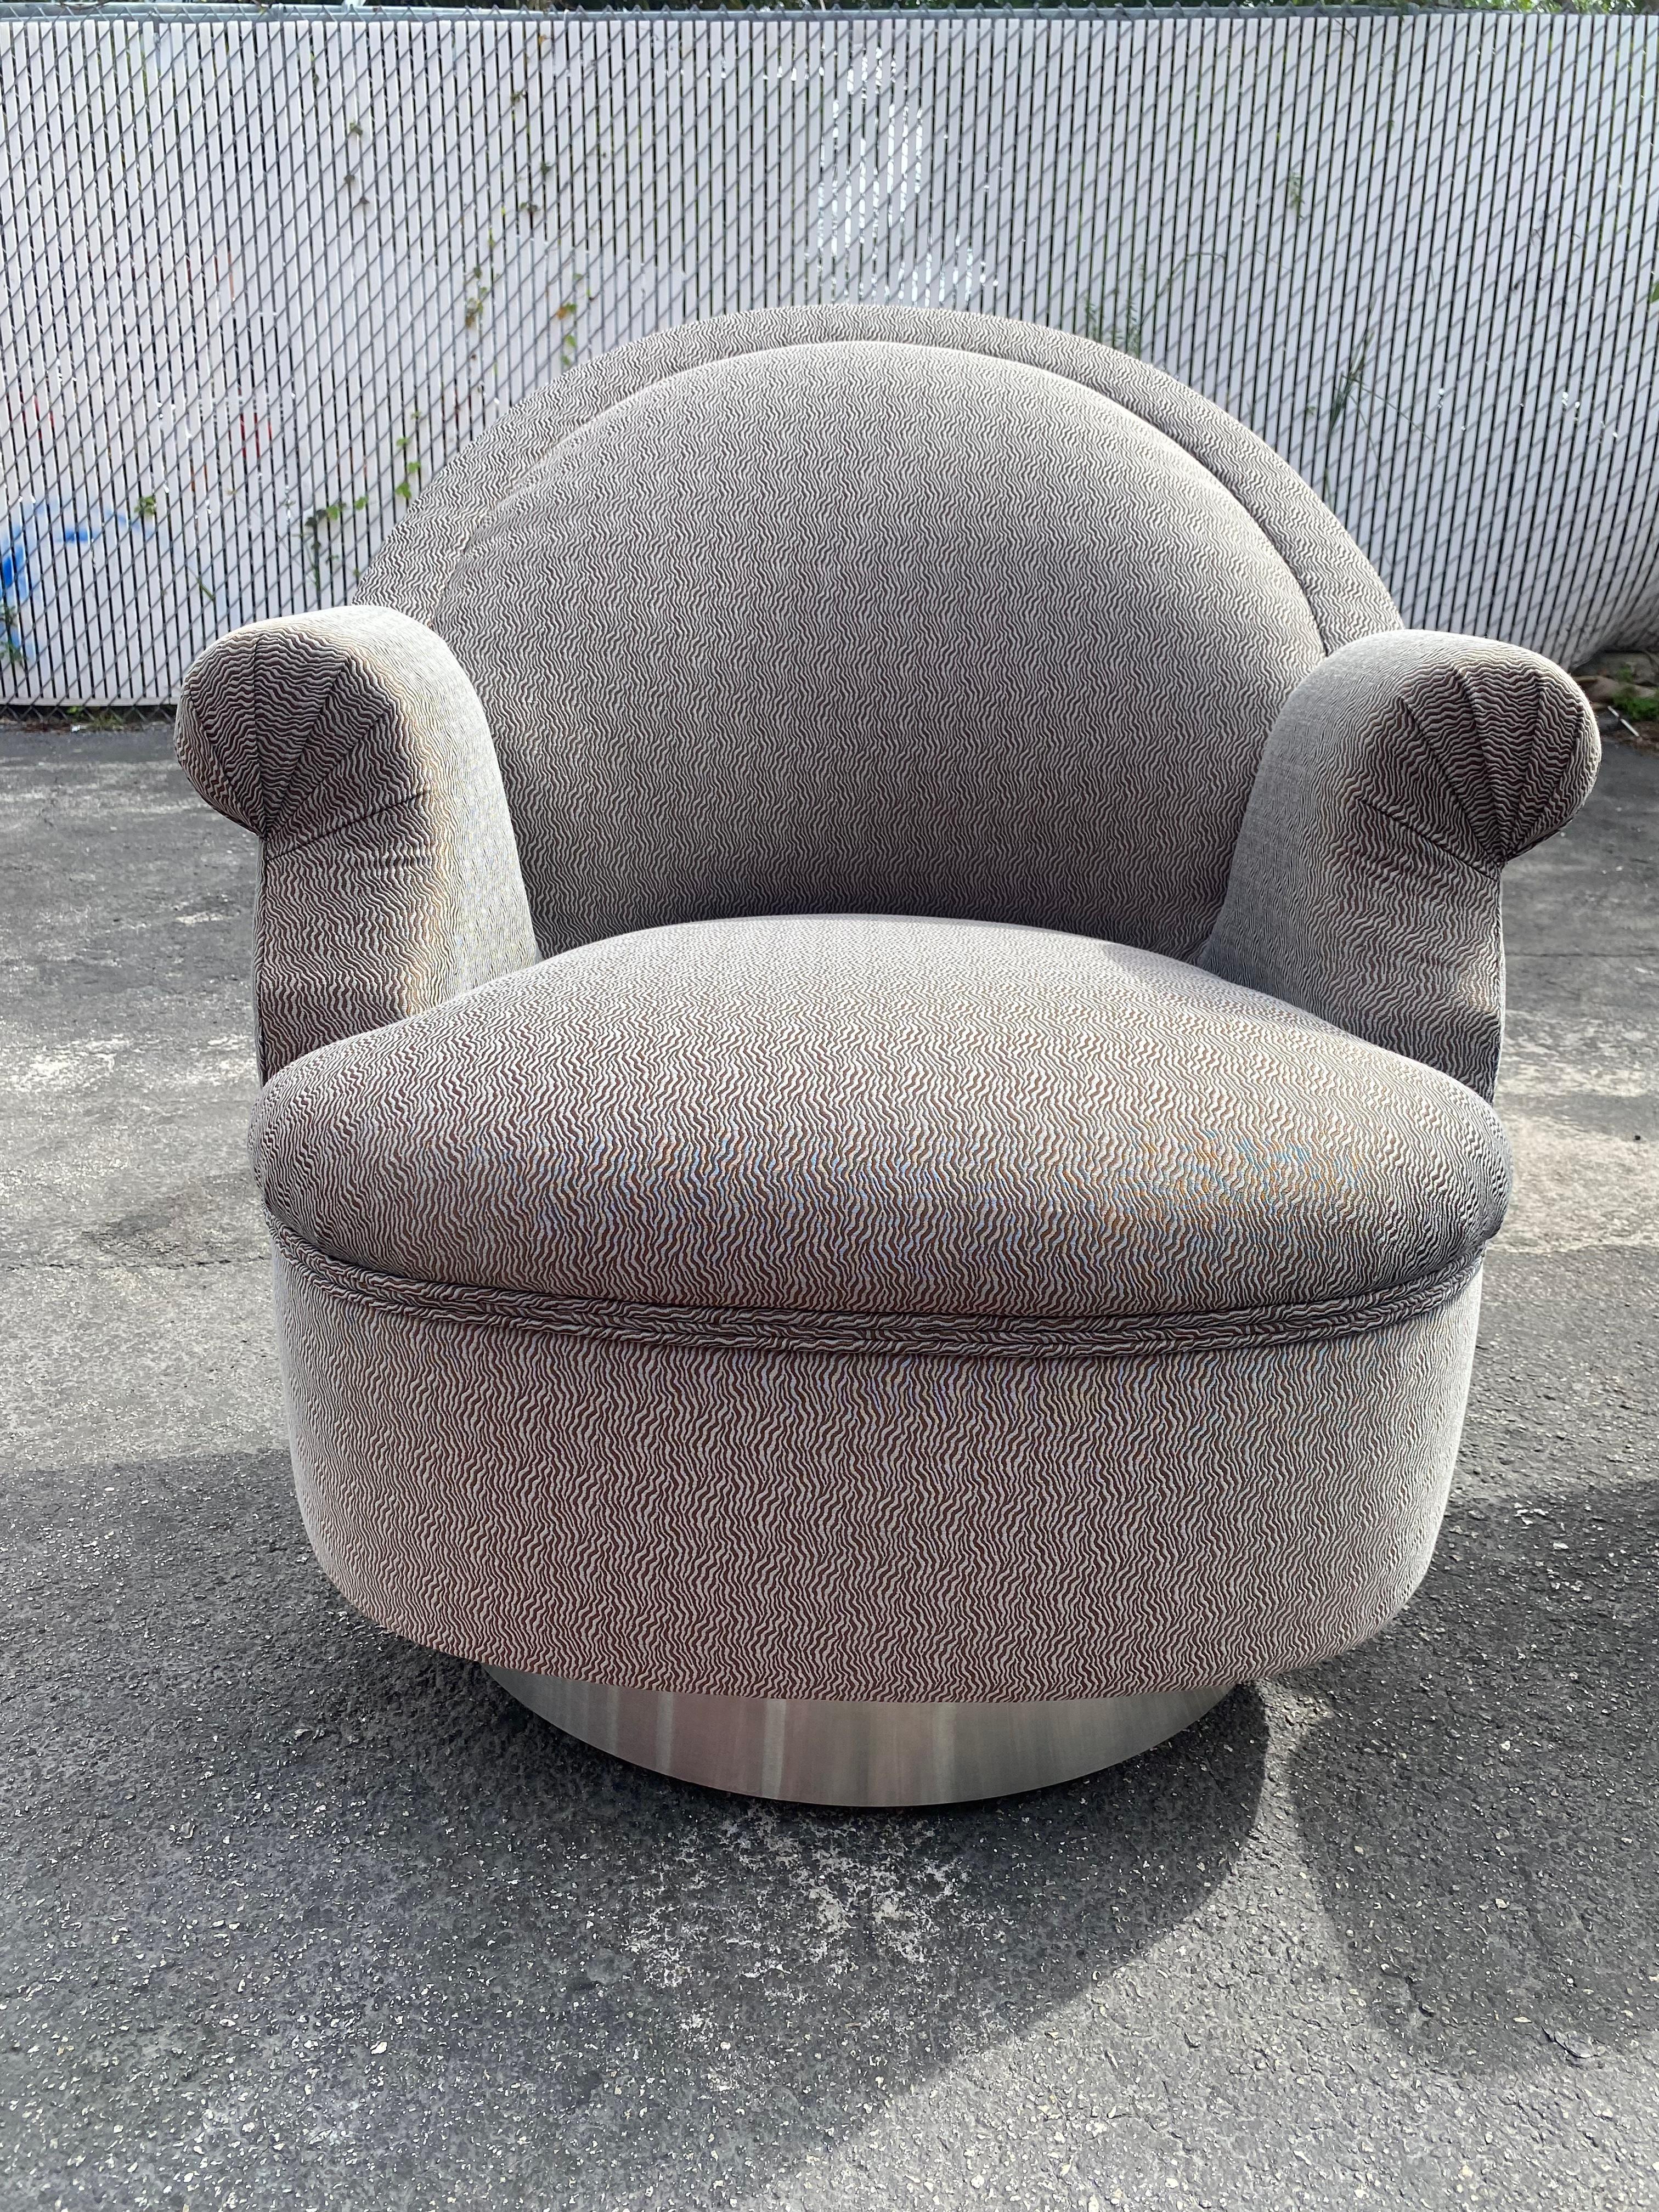 1980s Milo Baughman Rolling Swivel Chairs, Set of 2 For Sale 2